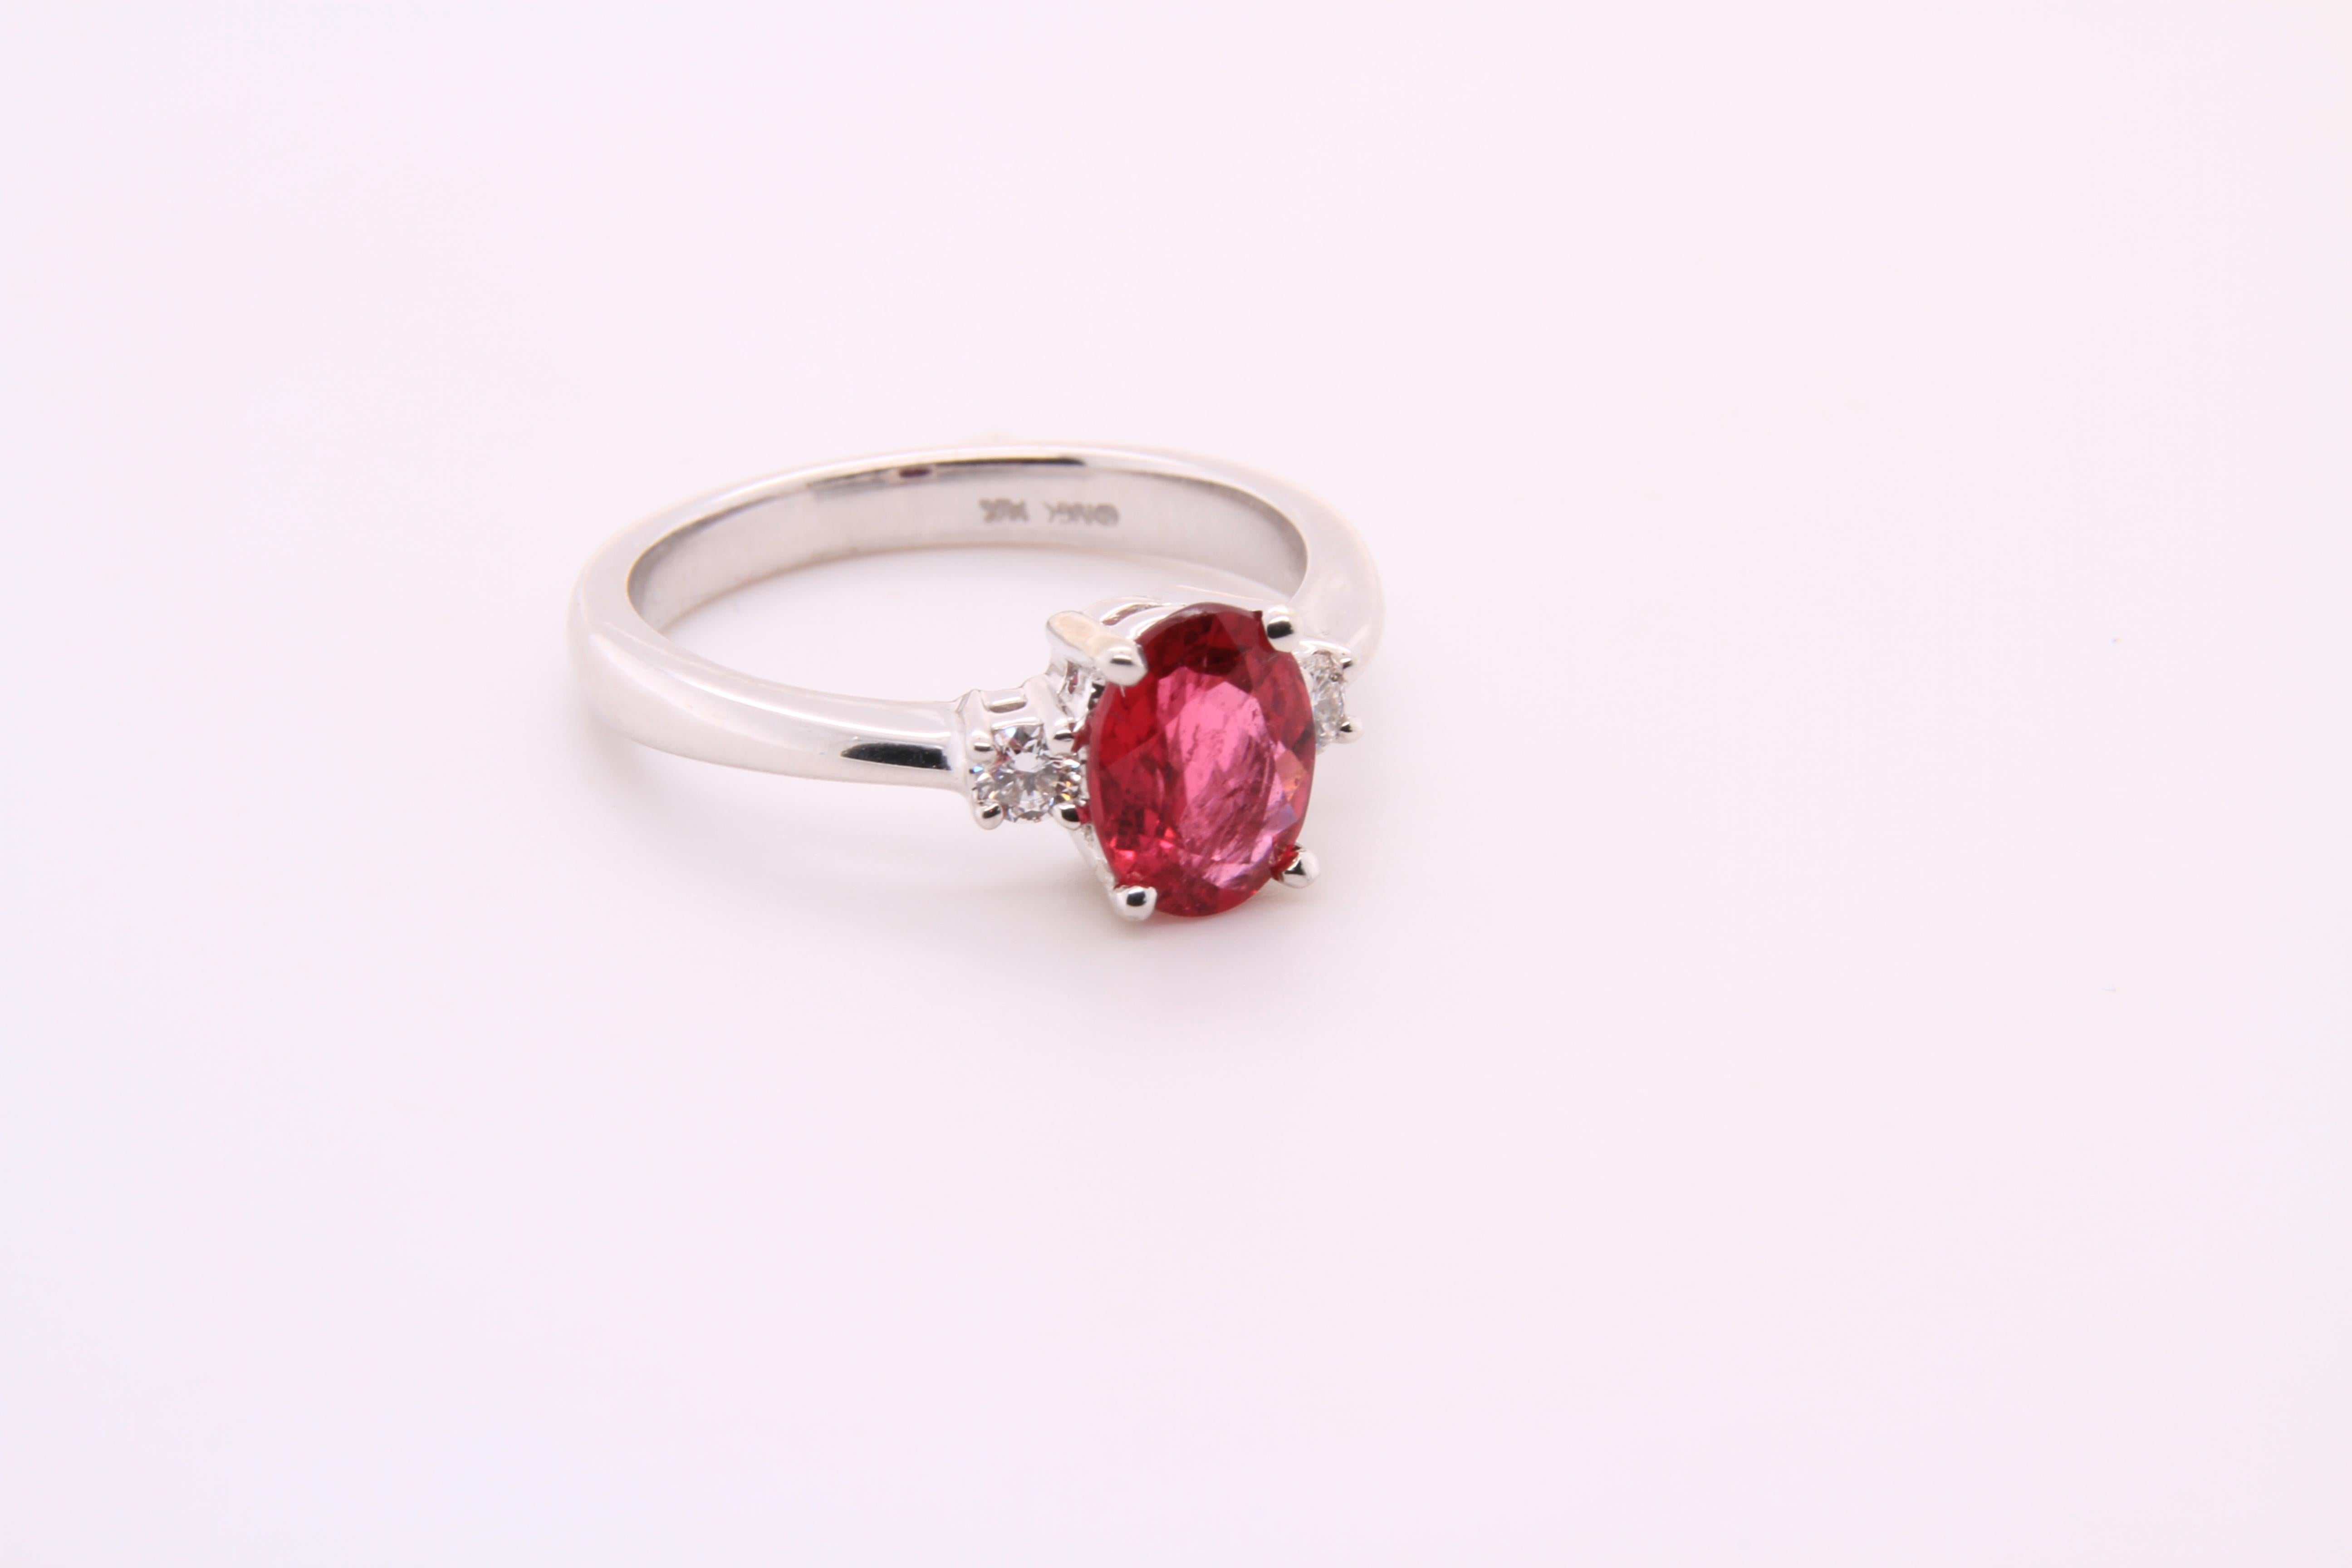 Bright, Pink, Oval Tourmaline Engagement Ring with Diamonds, 14K White Gold 2